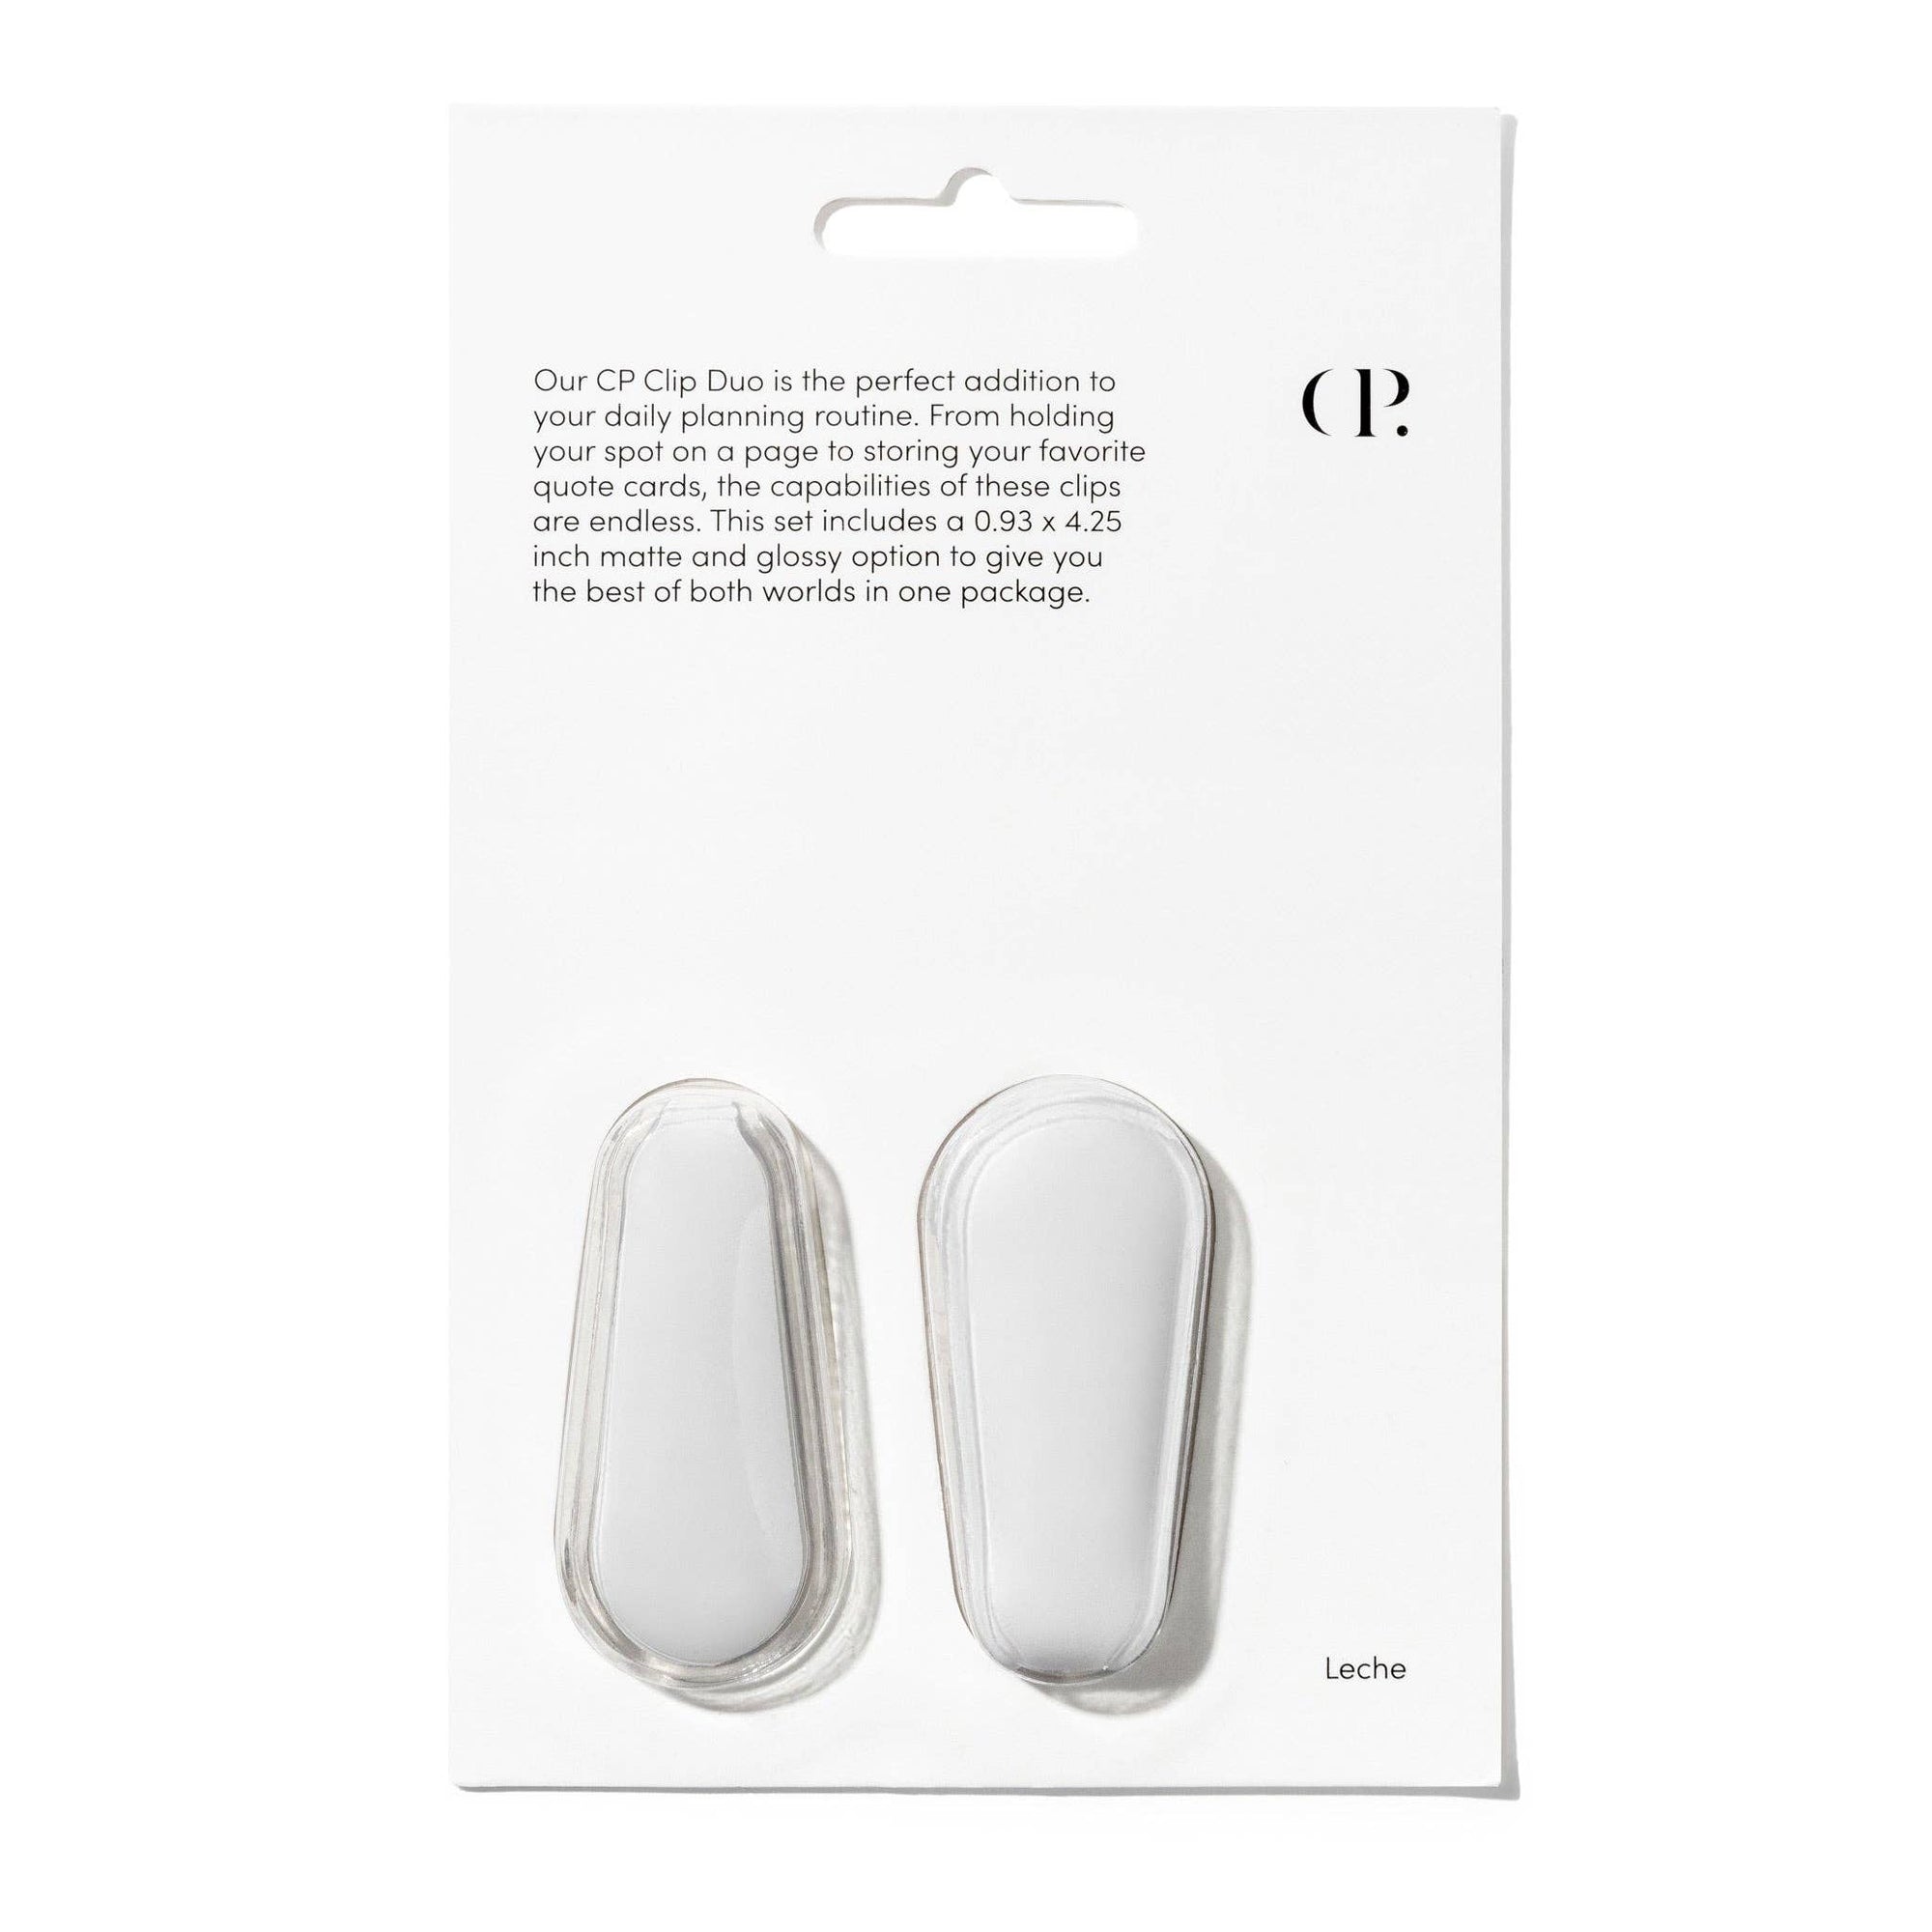 Cloth & PaperClip Duo | Leché: Leche - Gift & Gather